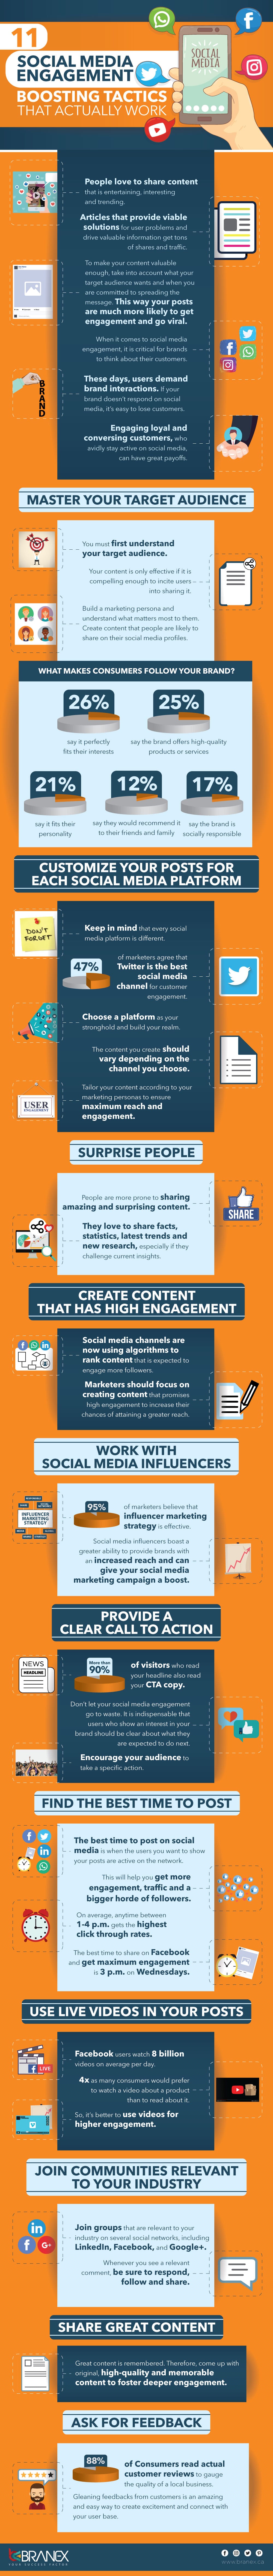 11 ways to boost social media engagement